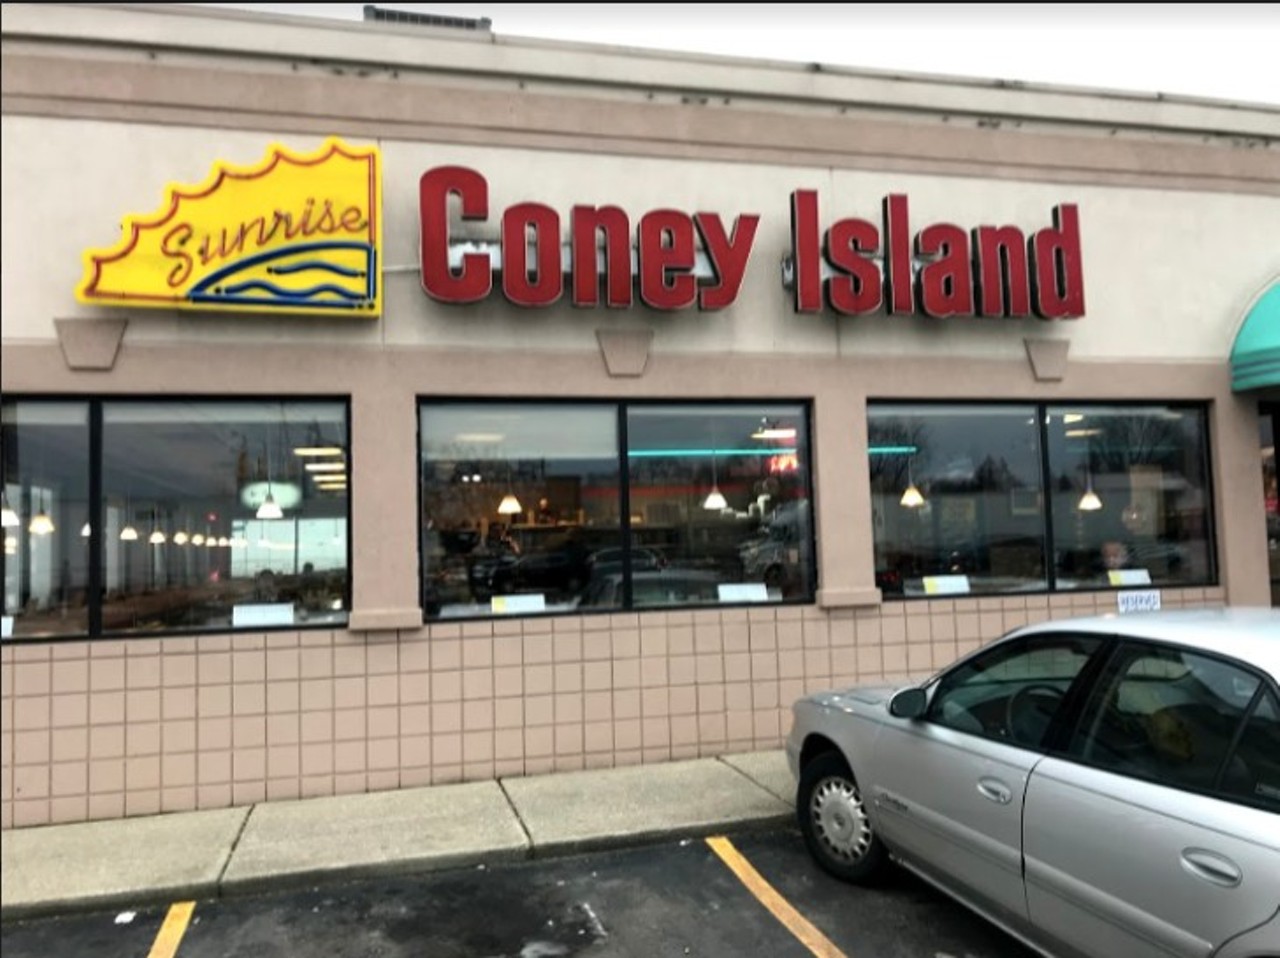 24. Sunrise Coney Island
22935 Van Dyke Ave., Warren
Warren&#146;s best. This unassuming spot at Nine Mile and Van Dyke is a shining example of an underrated coney plus a reputable breakfast menu.
Photo by Mike Dionne